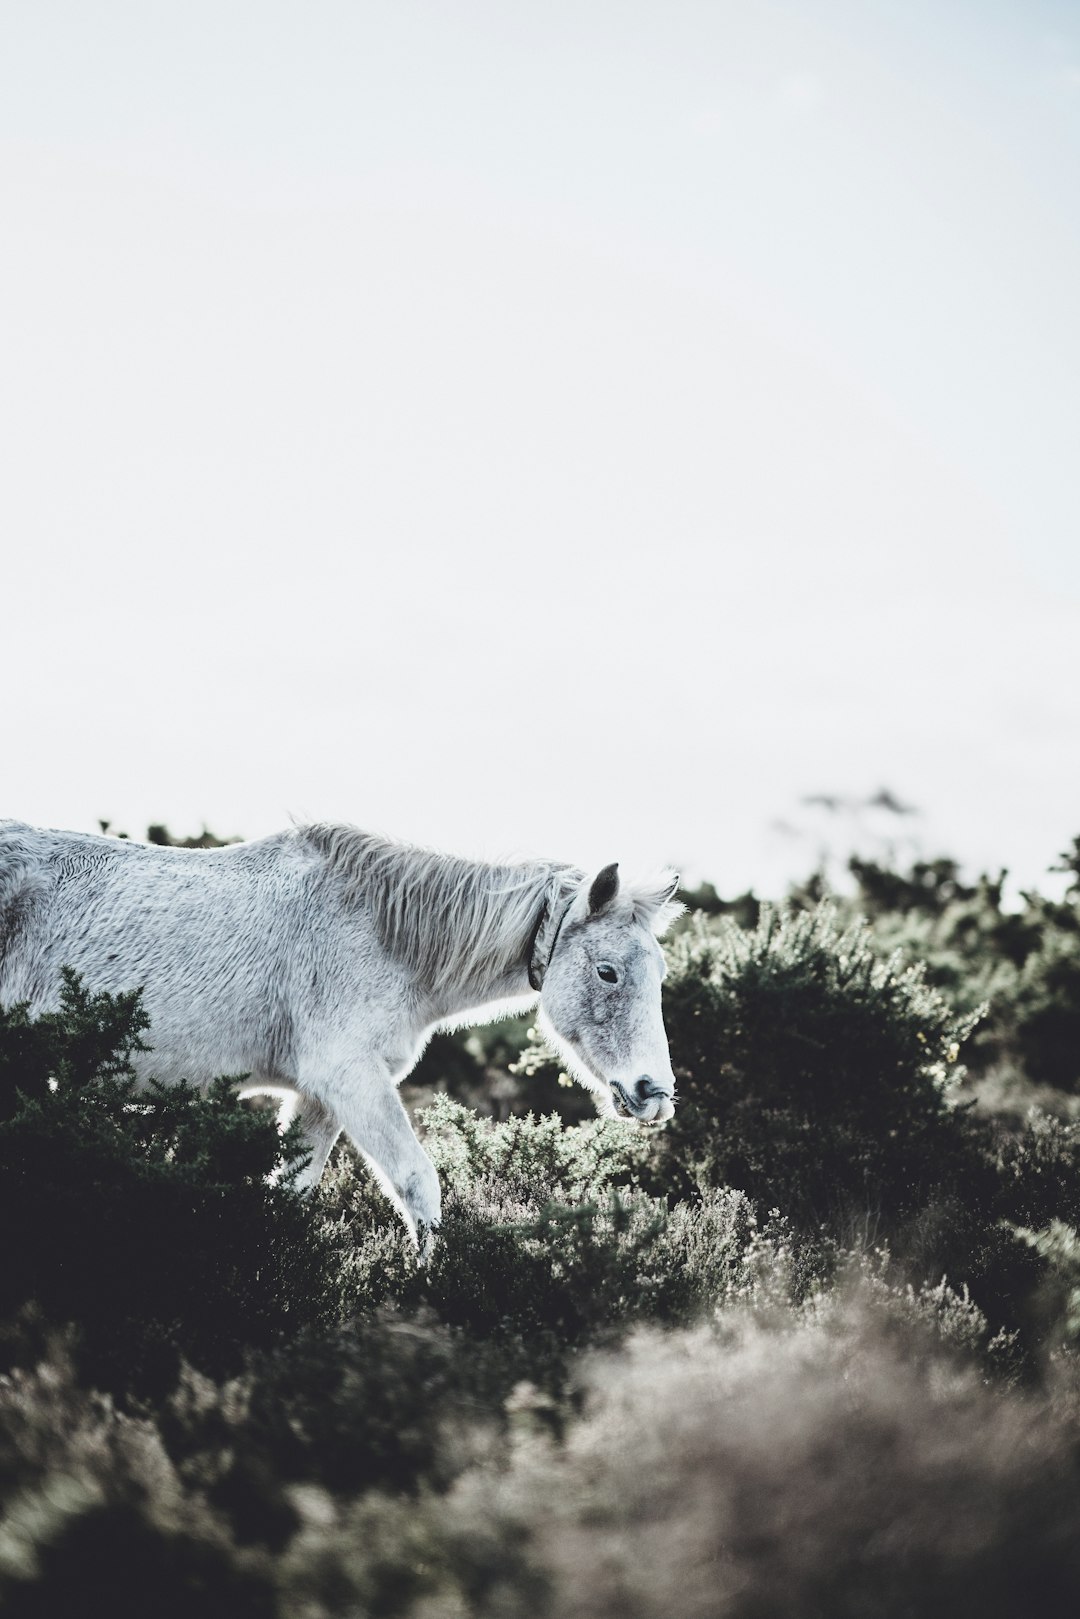 shallow focus photo of gray horse